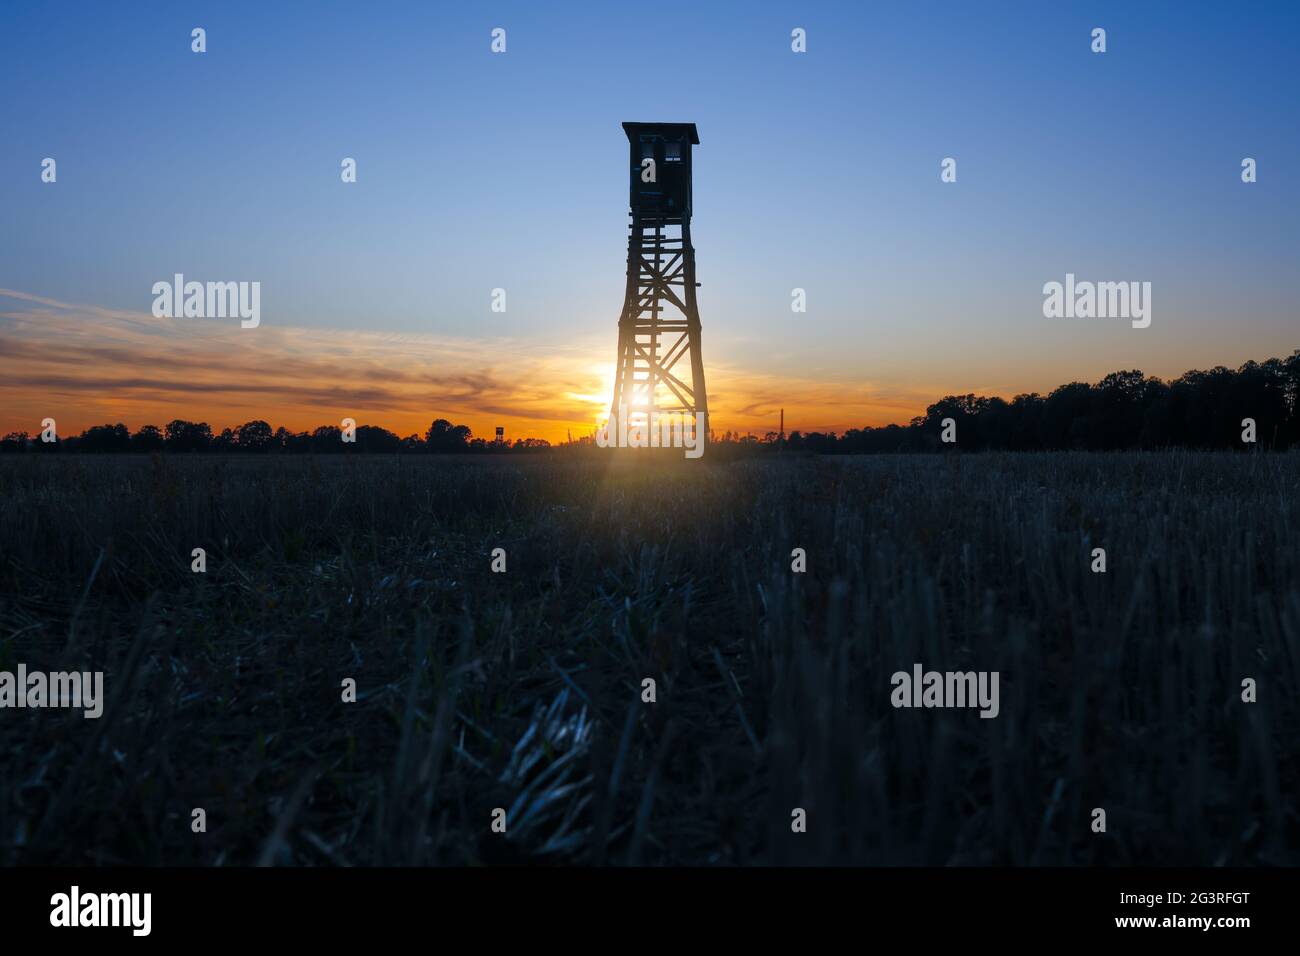 Hunting season, hunting ground, autumn, sunset, high seat, harvested field, forestry, hunters pearch Stock Photo